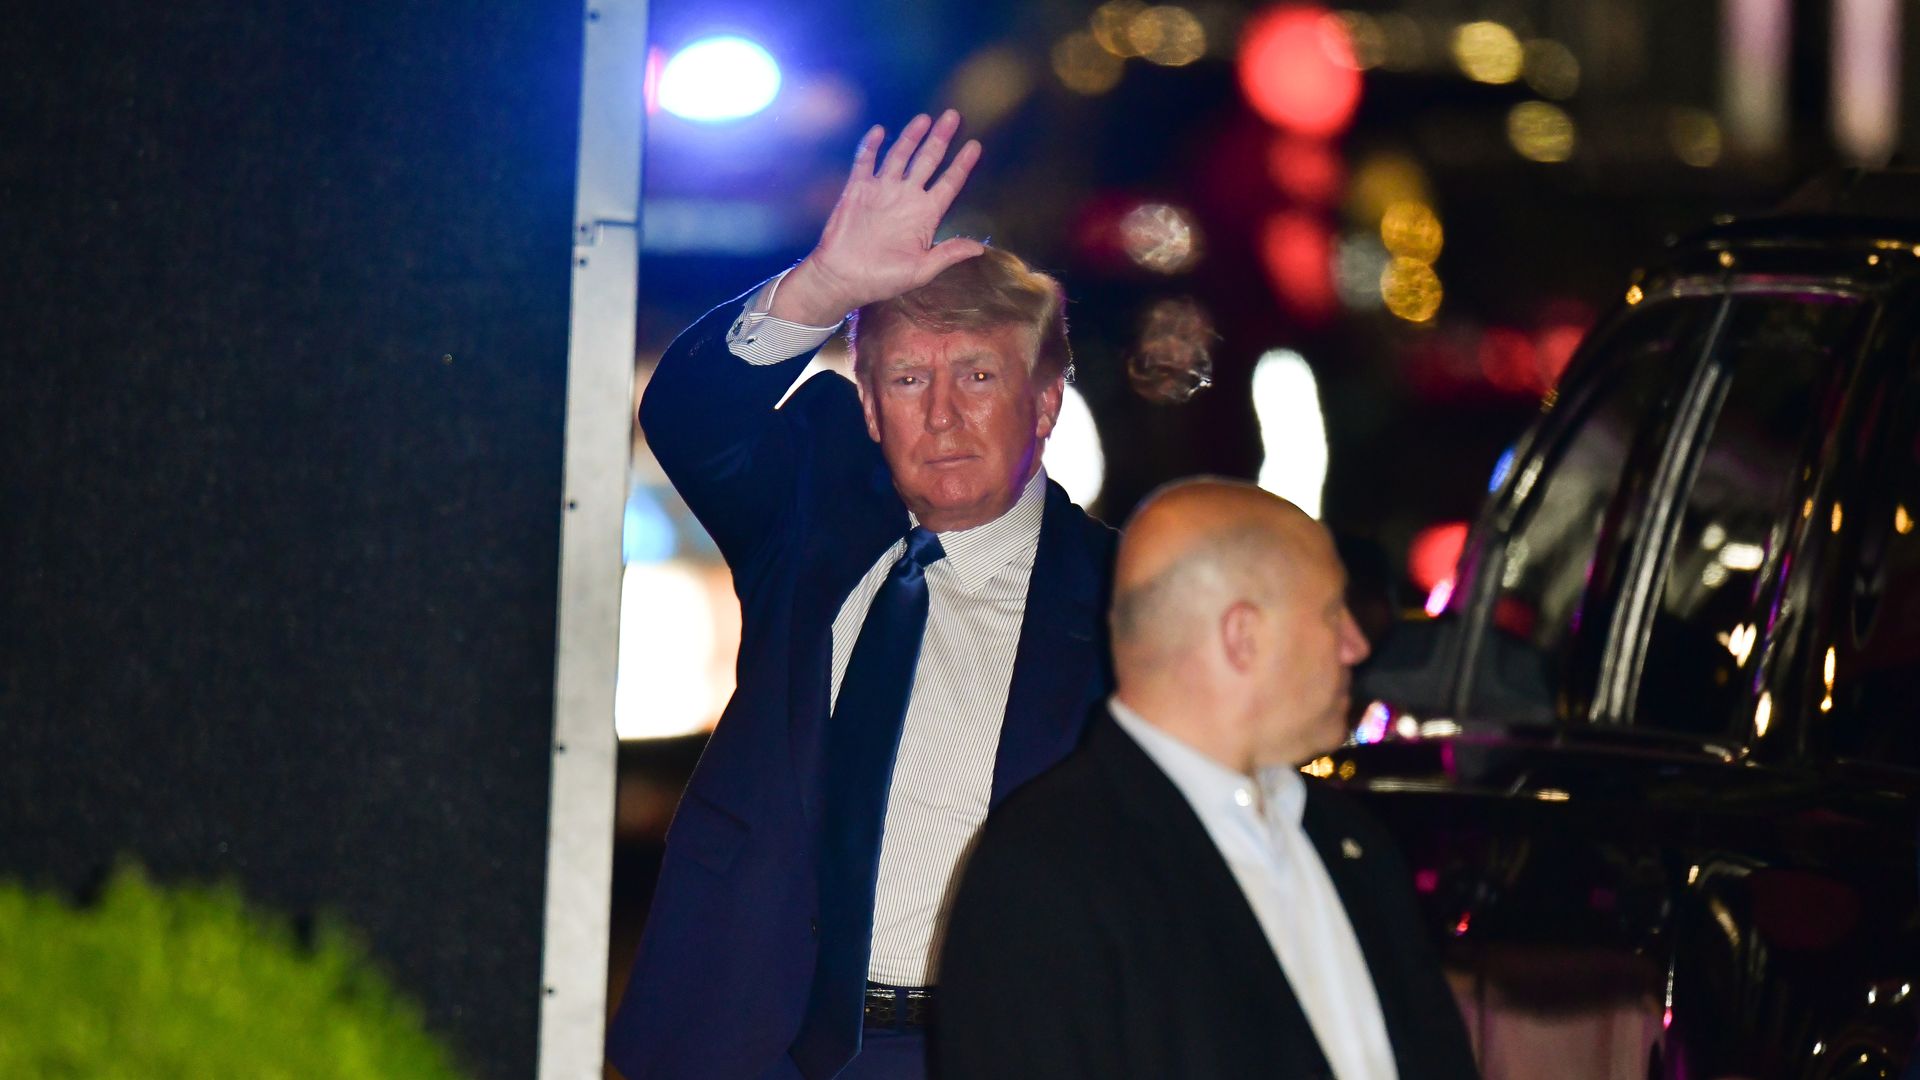 Photo of Donald Trump waving his right hand as he exits a vehicle on a road at night